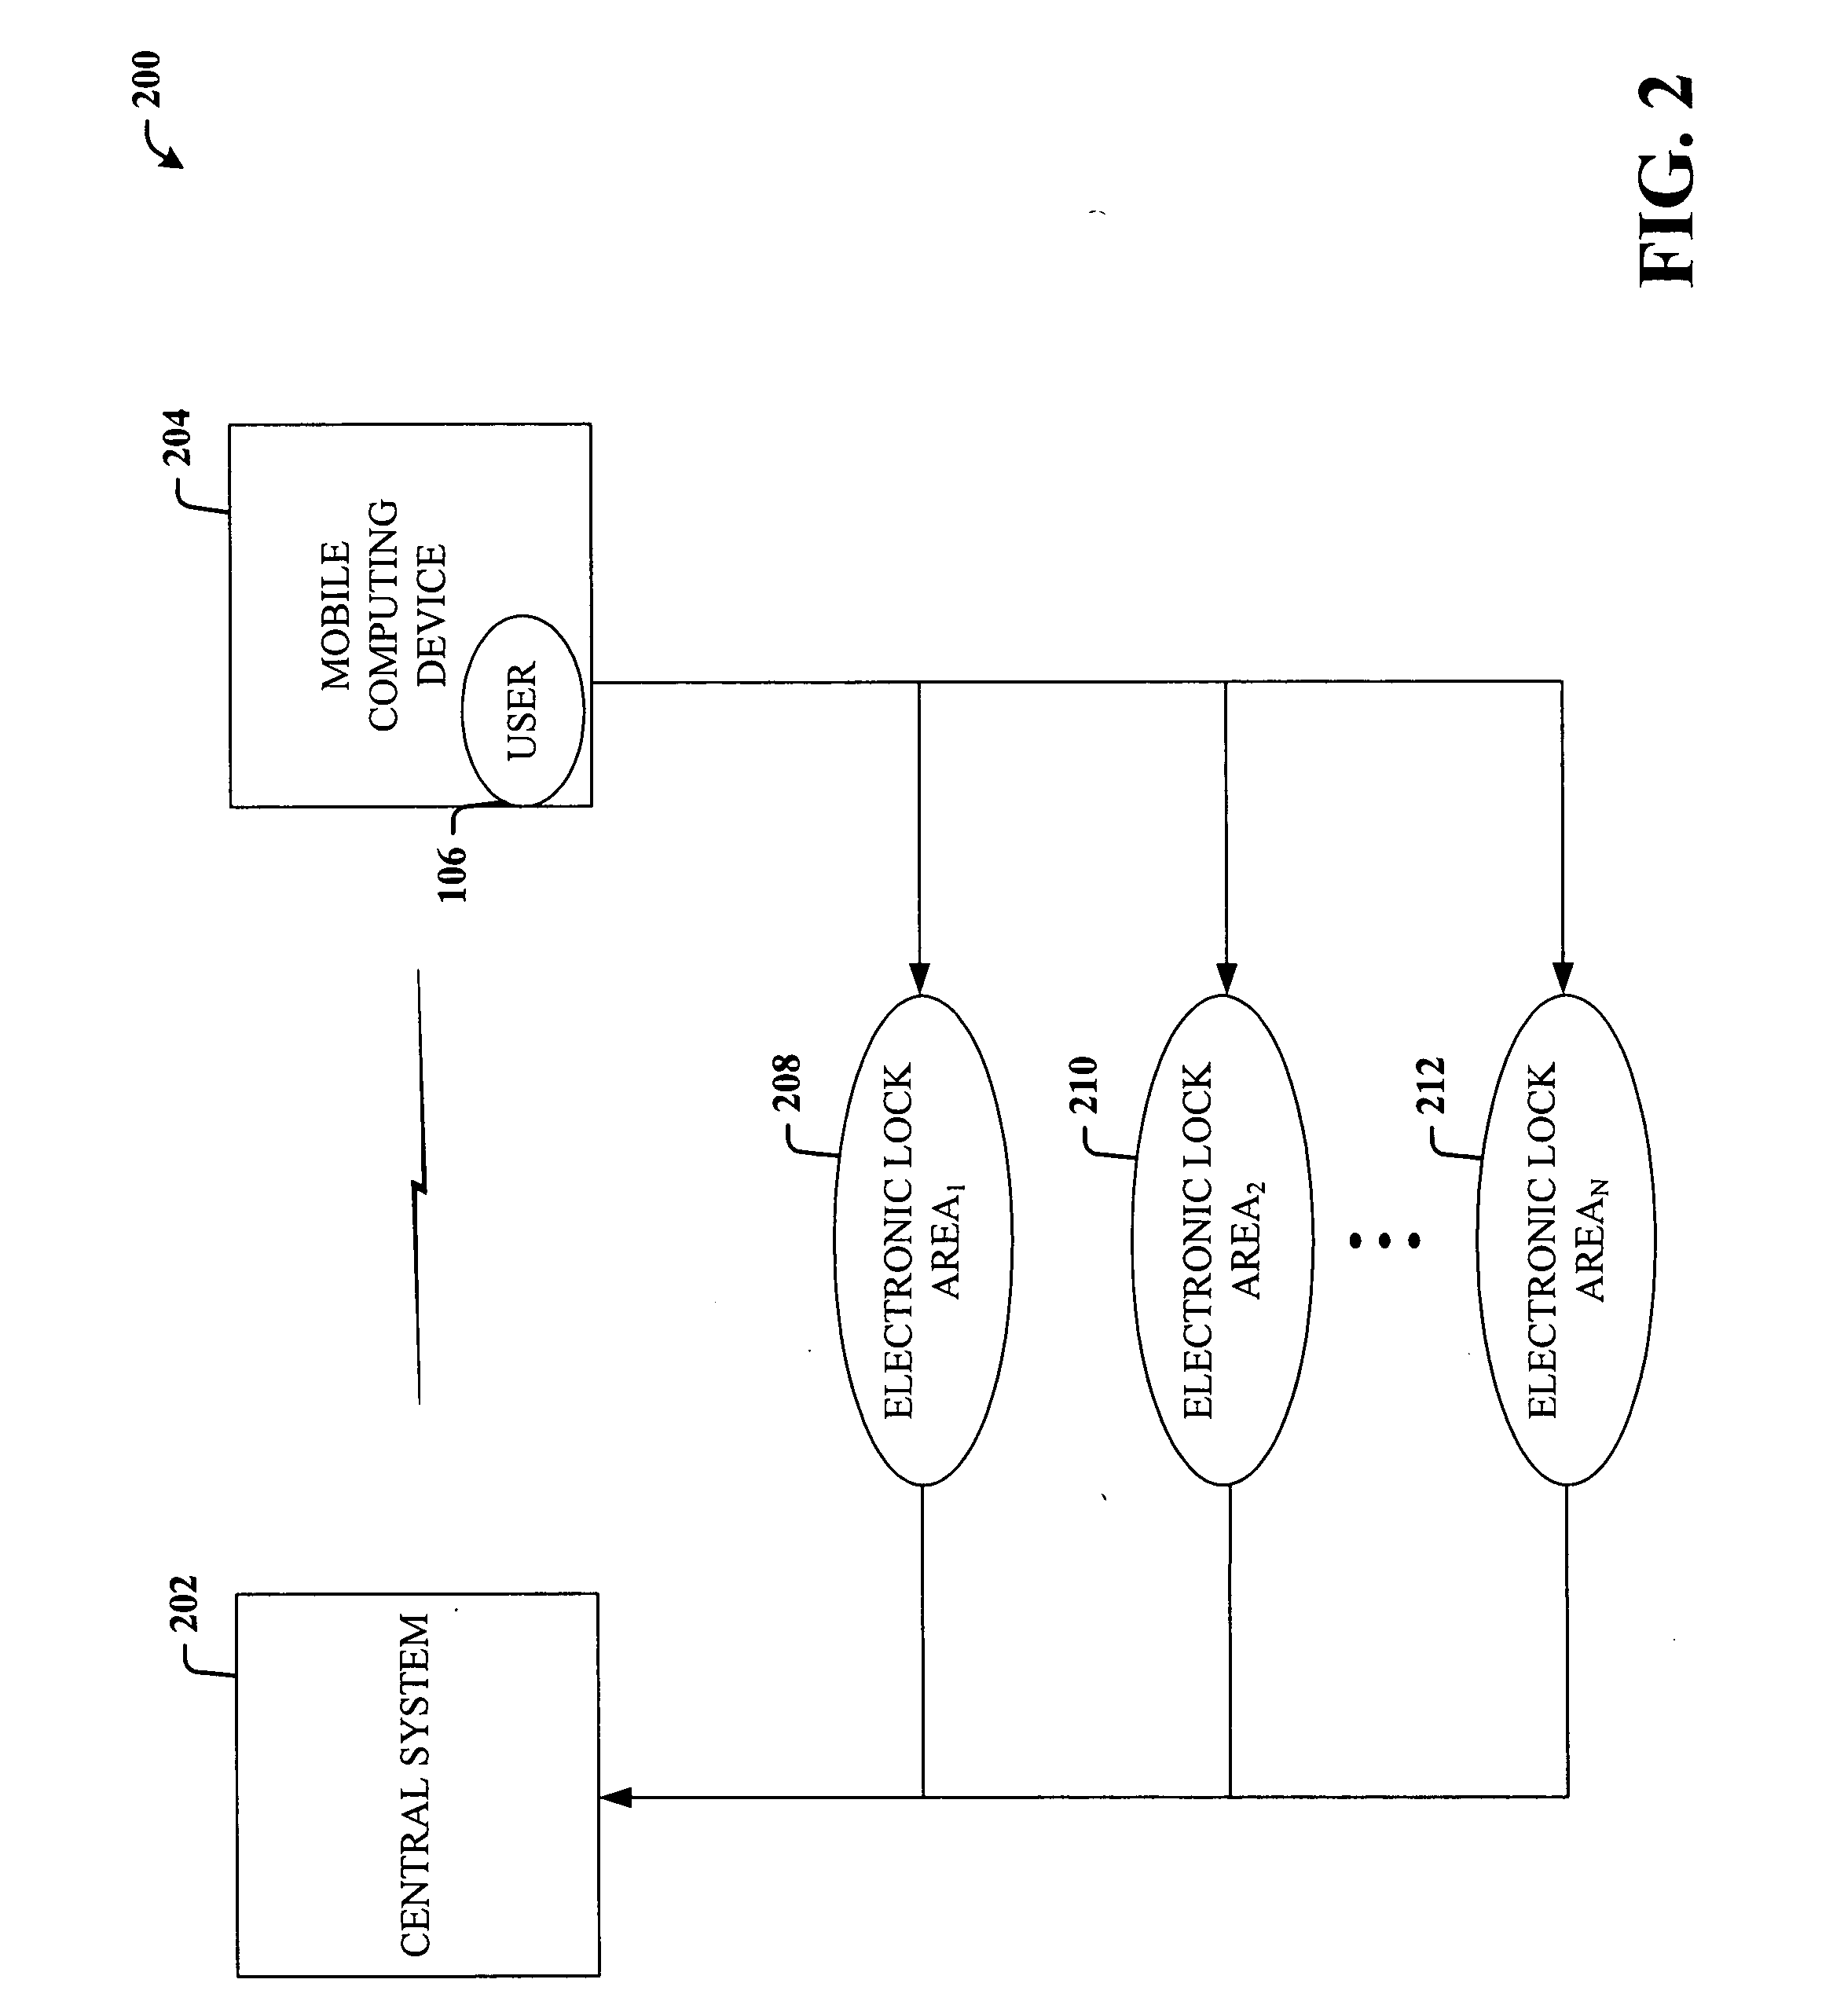 Prohibiting radio frequency transmissions in a restricted environment